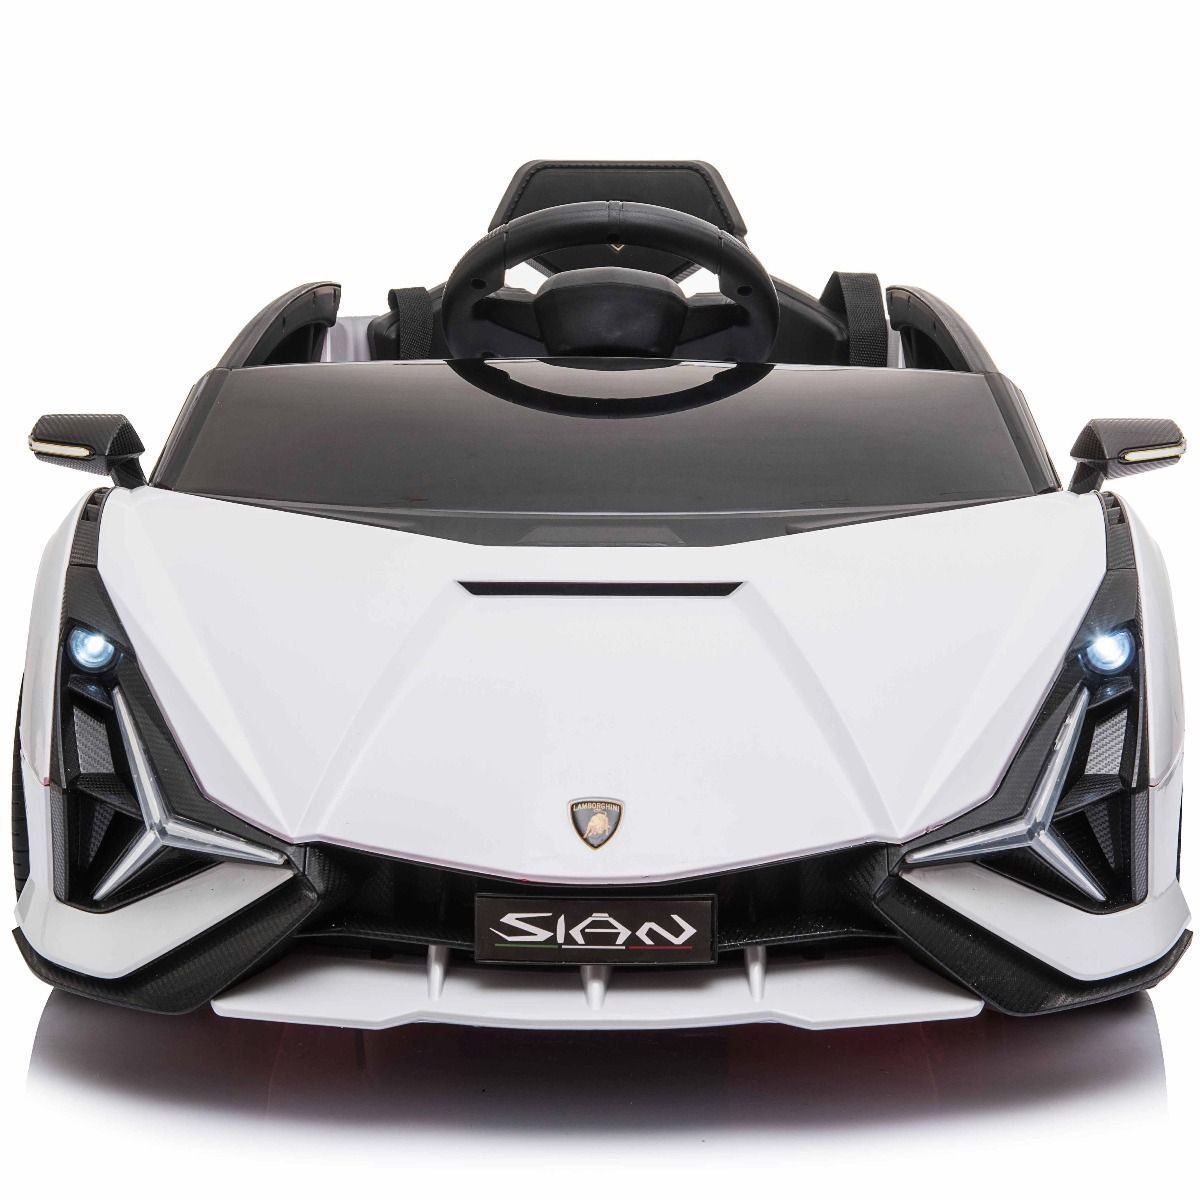 White and black Lamborghini Sián electric ride-on car for kids with MP4 screen, front view, equipped with parental control features.